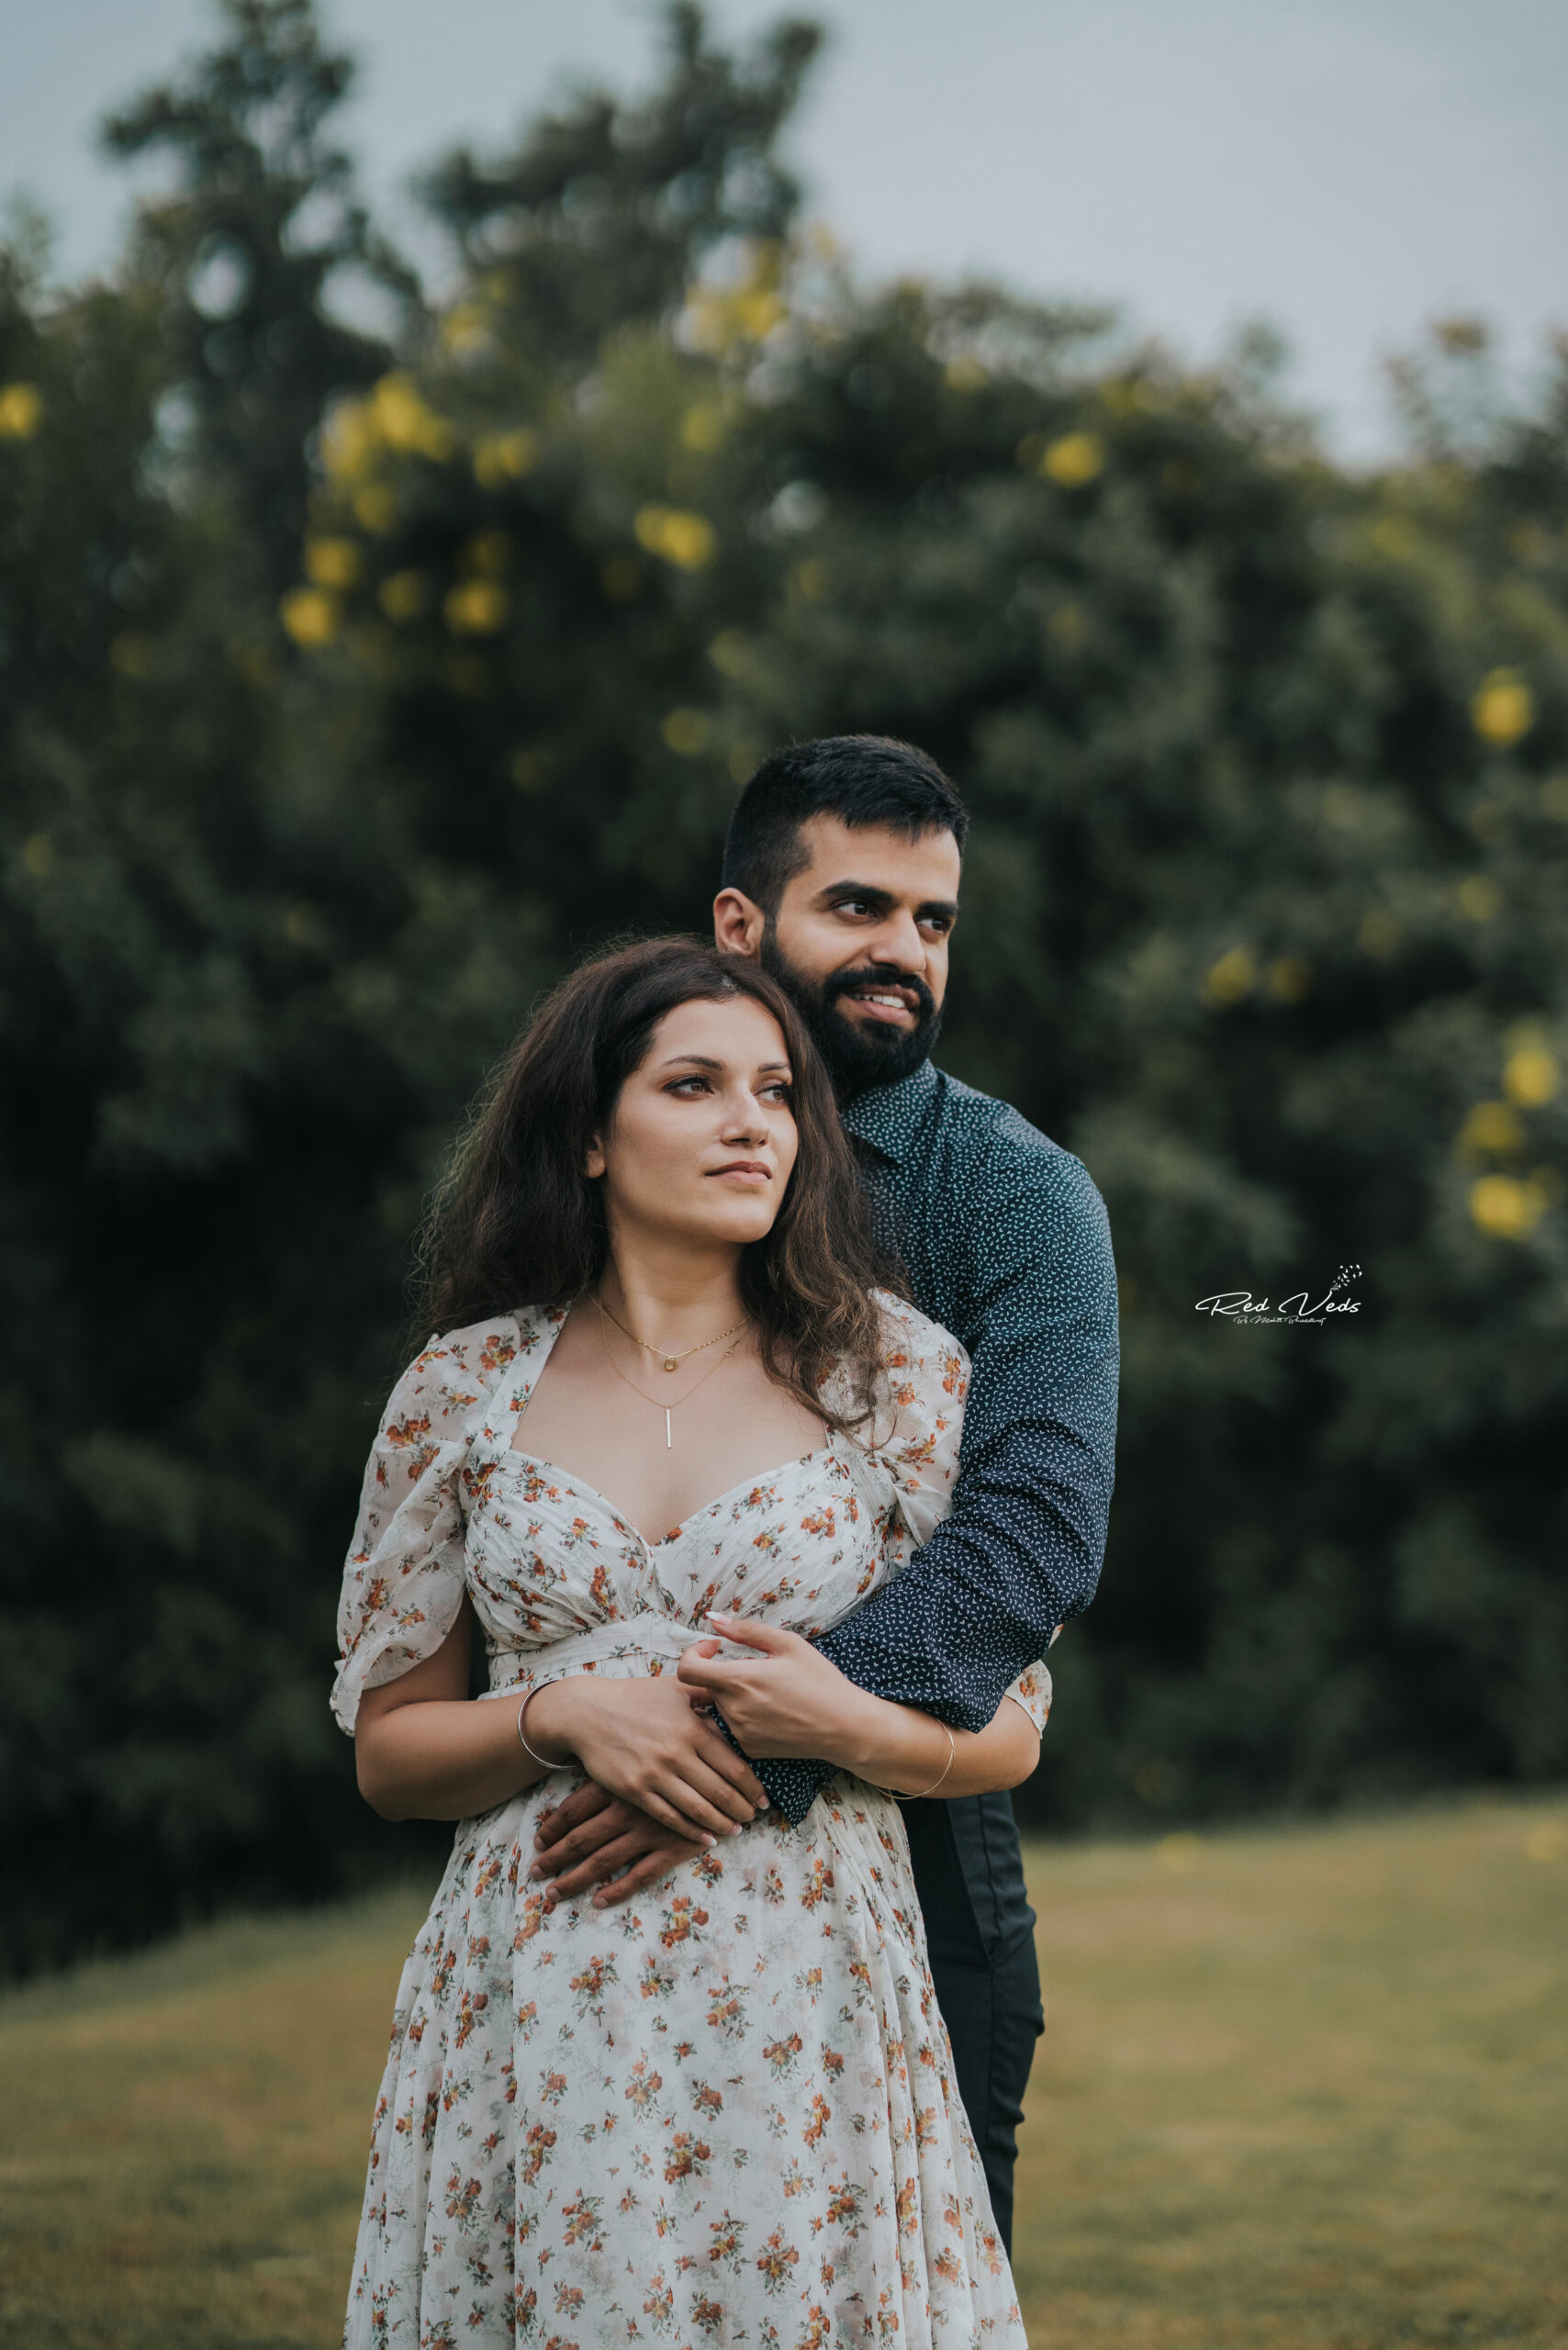 Blog | Unique Ideas for an Engagement Session in Spring